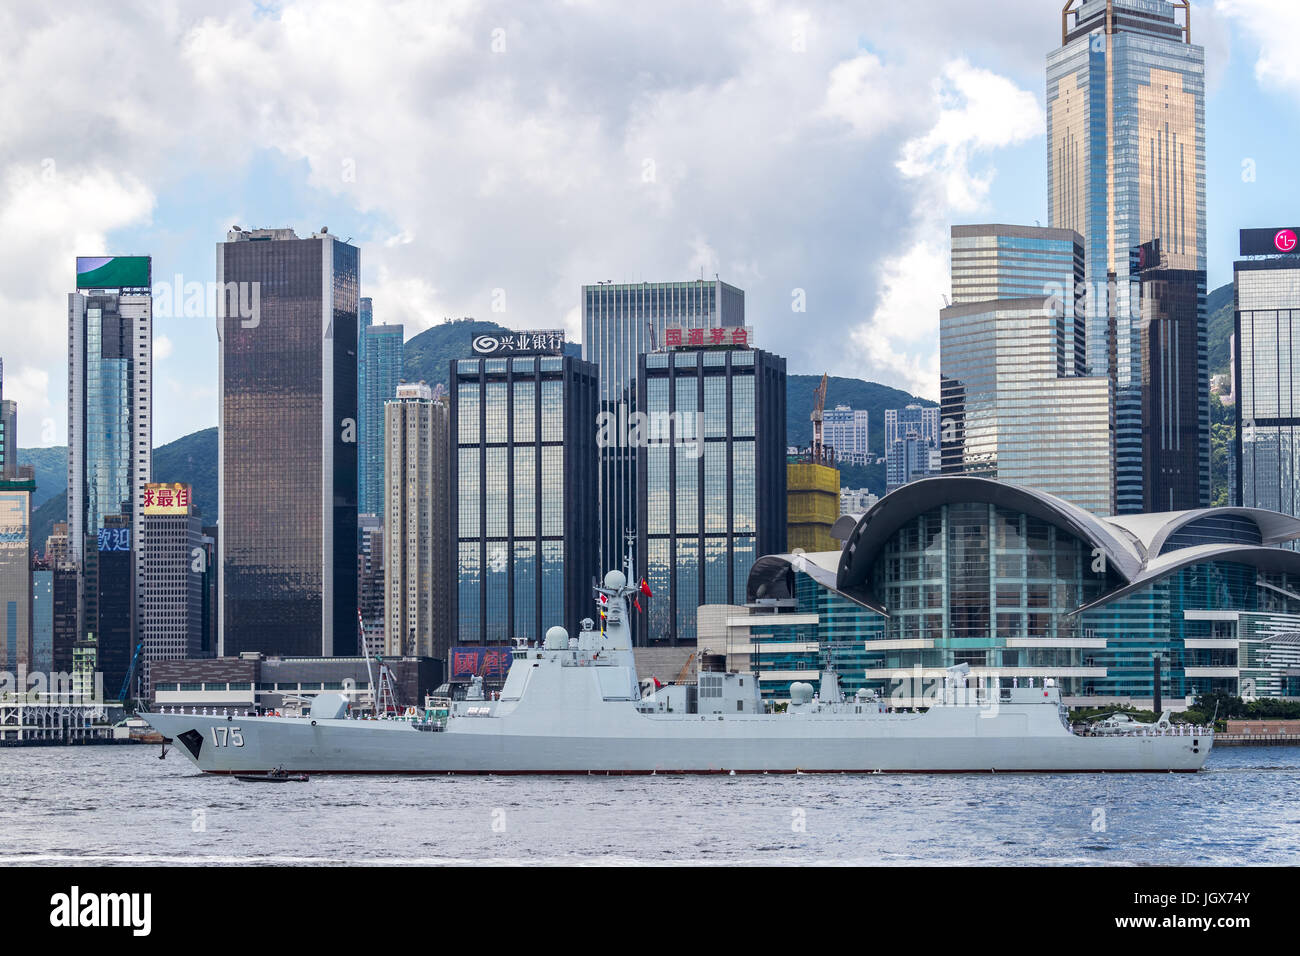 Victoria Harbour, Hong Kong. 11th June, 2017. Yinchuan (number 175) missile destroyer acrossed Victoria harbour of Hong Kong returning naval base in mainland of China. Credit: Earnest Tse/Alamy Live News Credit: Earnest Tse/Alamy Live News Stock Photo